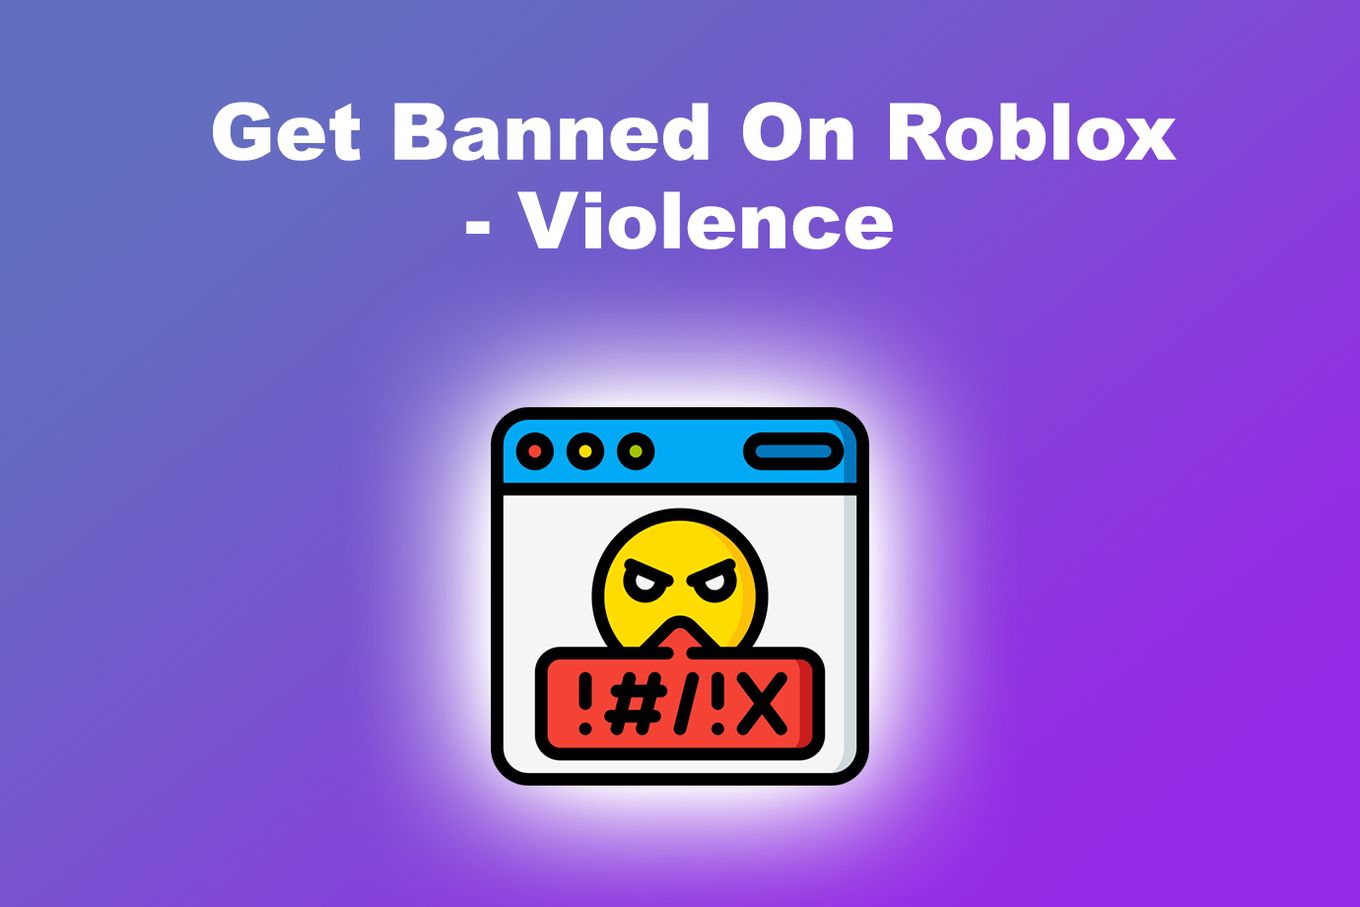 Violence - Get Banned On Roblox